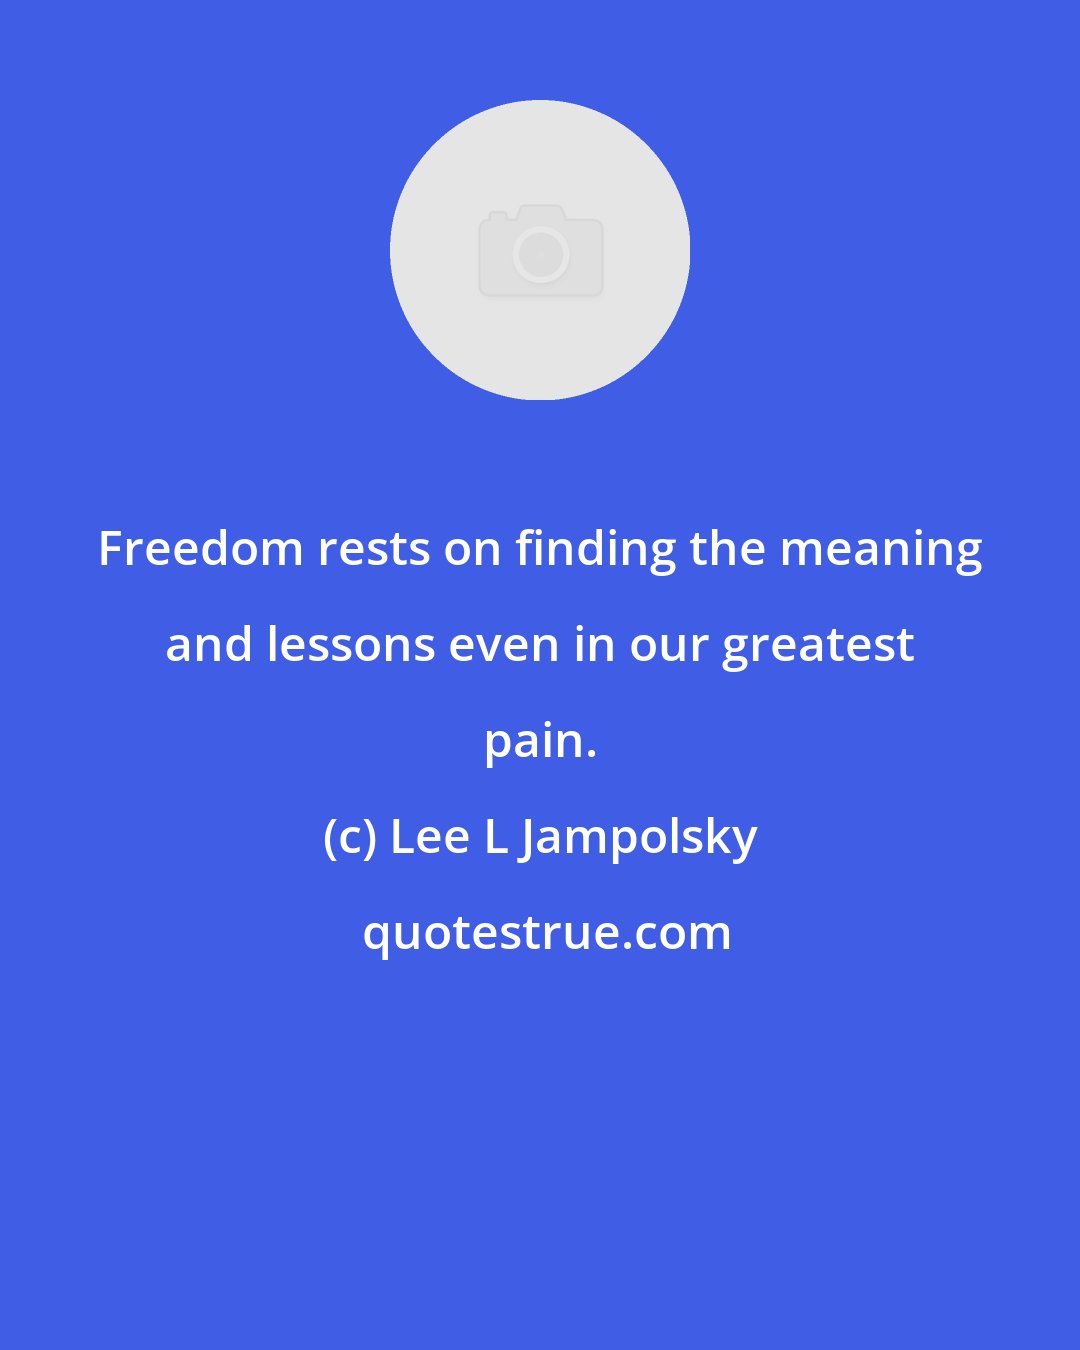 Lee L Jampolsky: Freedom rests on finding the meaning and lessons even in our greatest pain.